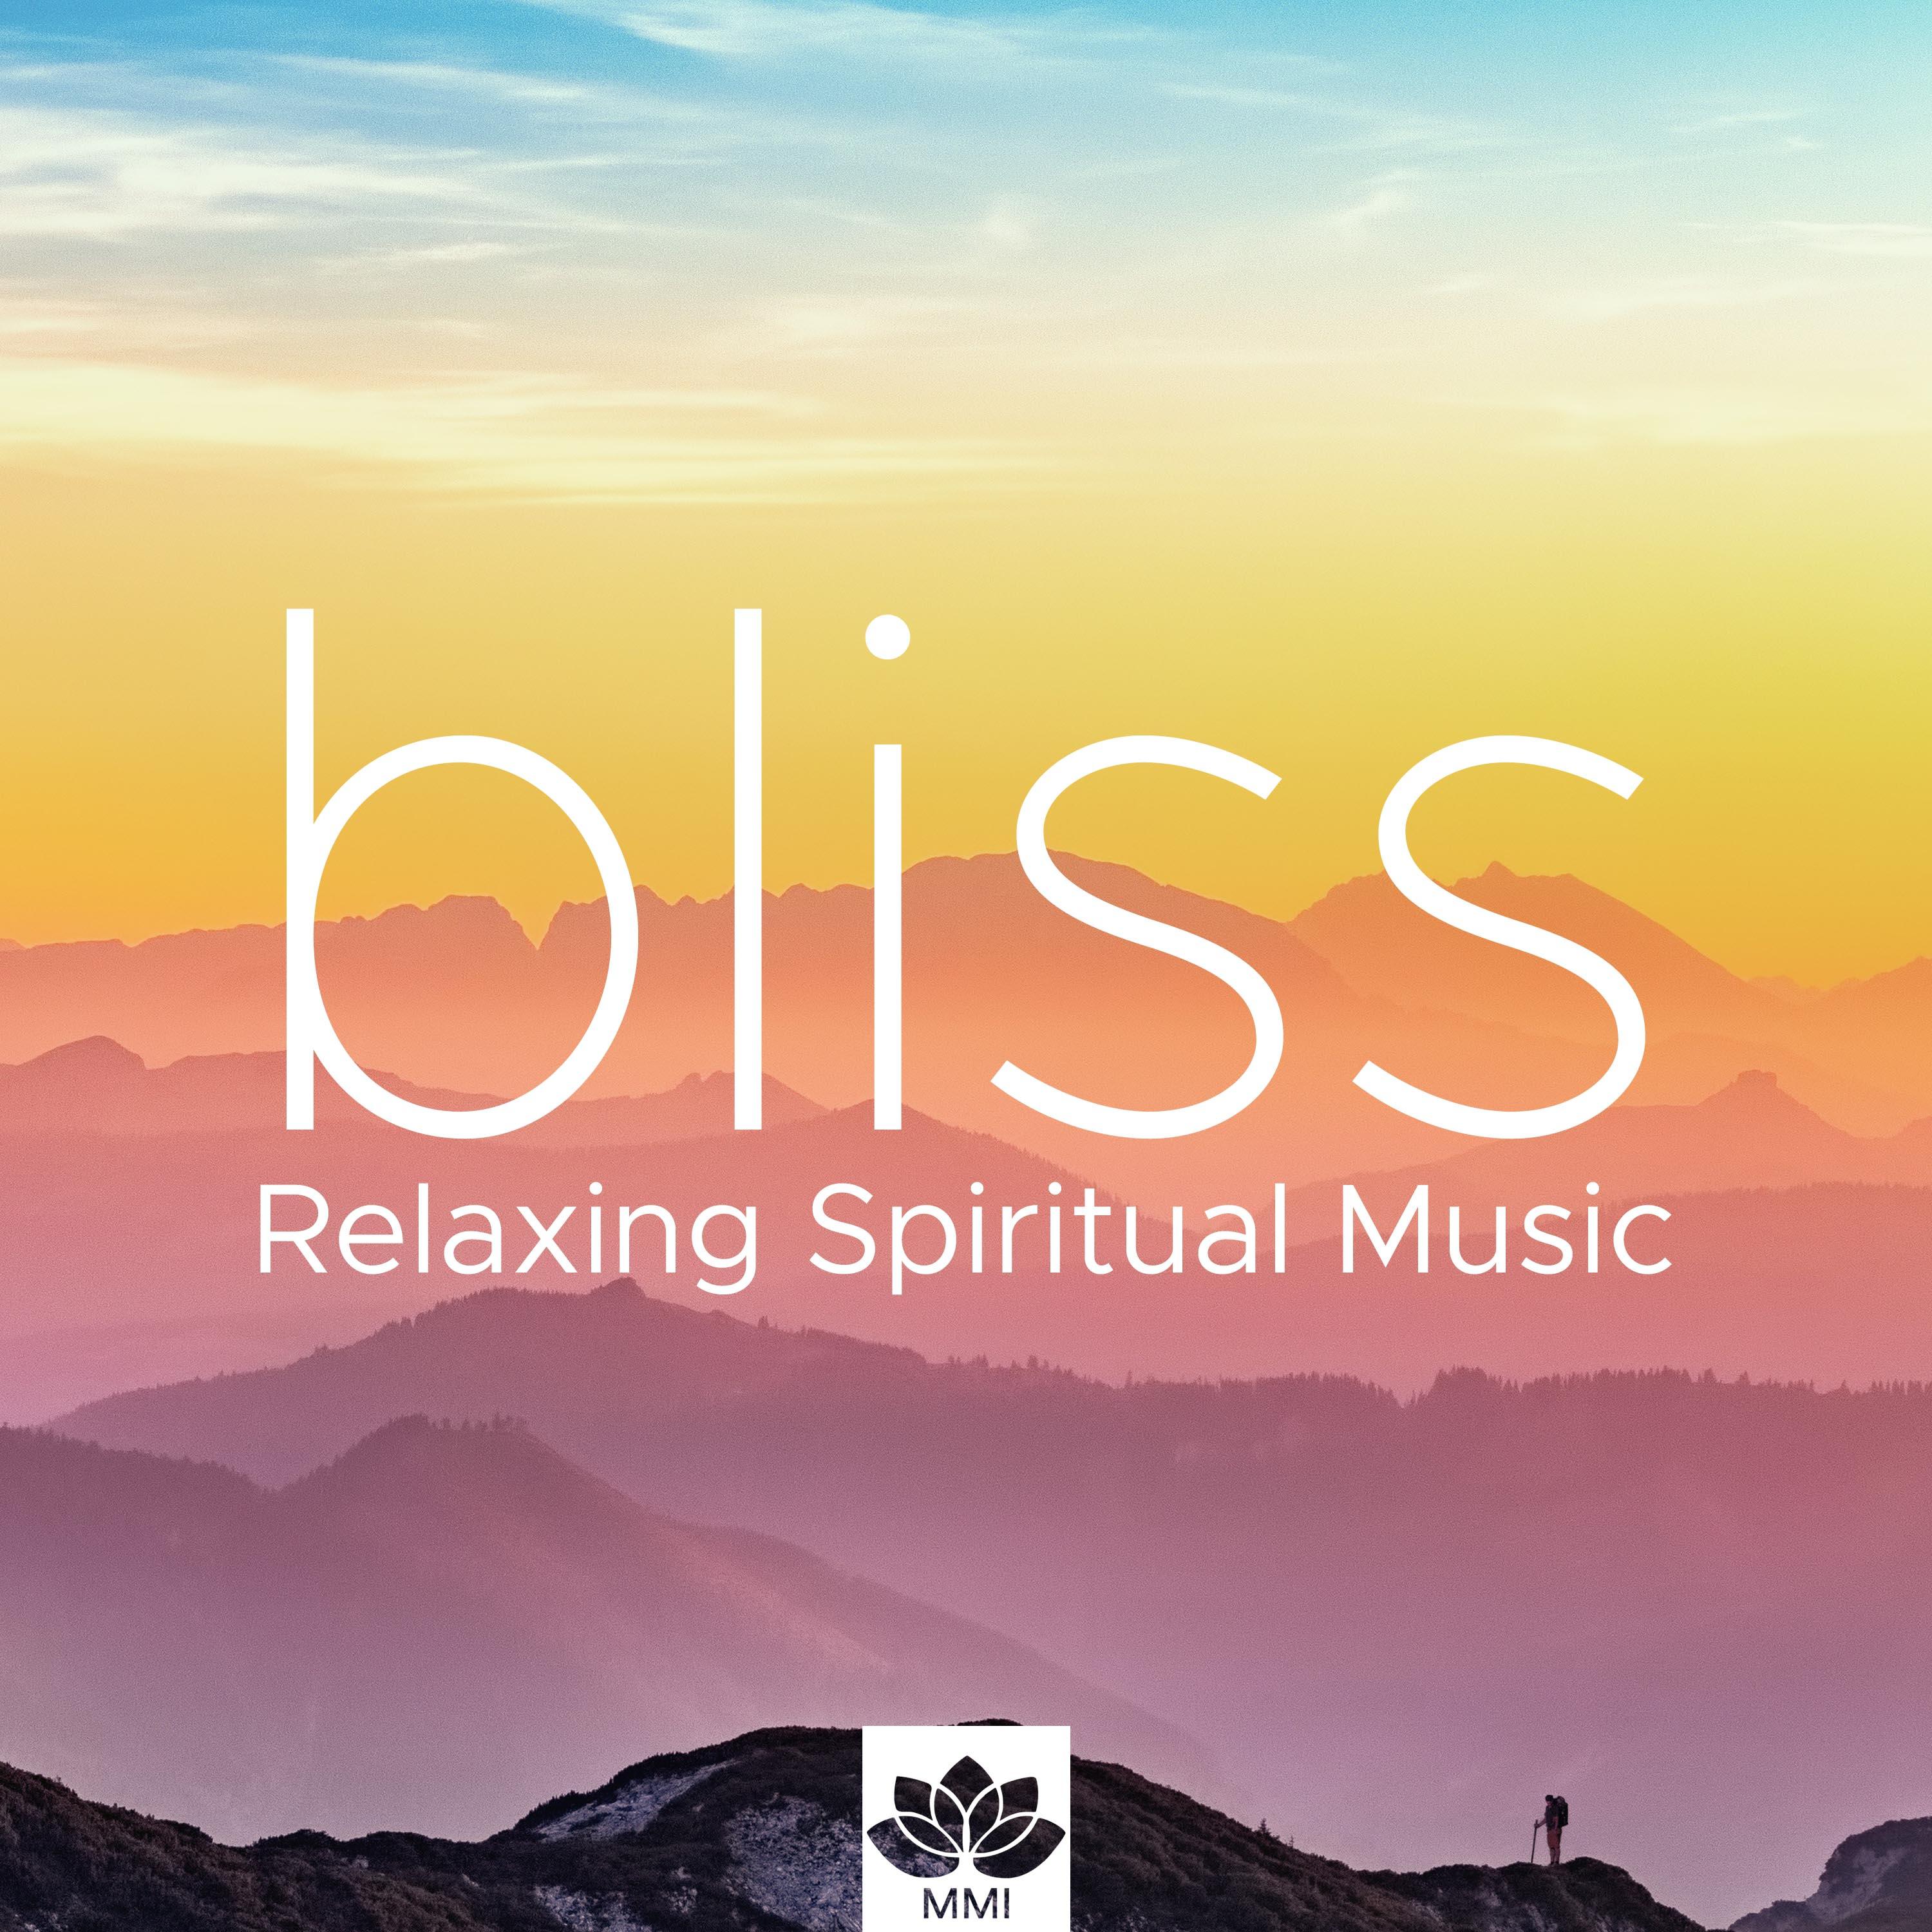 Meditation Music Therapy